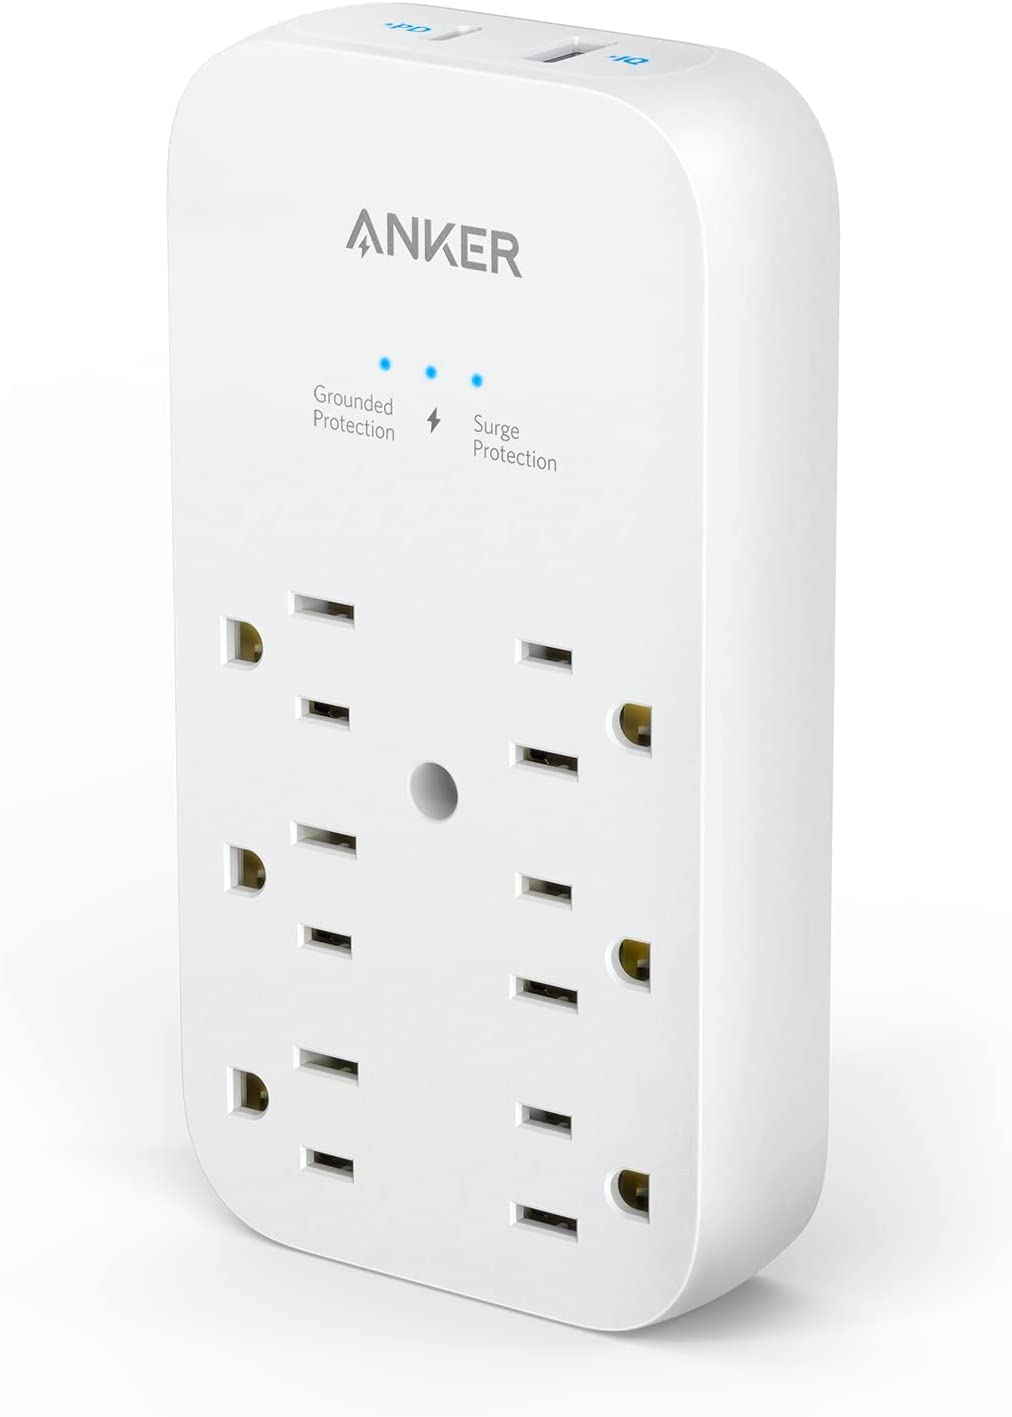 Anker Outlet Extender and USB Wall Charger, 6 Outlets and 2 USB Ports, 20W USB C Power Delivery High-Speed Charging iPhone 12/ iPhone 12 Pro, Multi-Plug for College Dorm  - $15.99